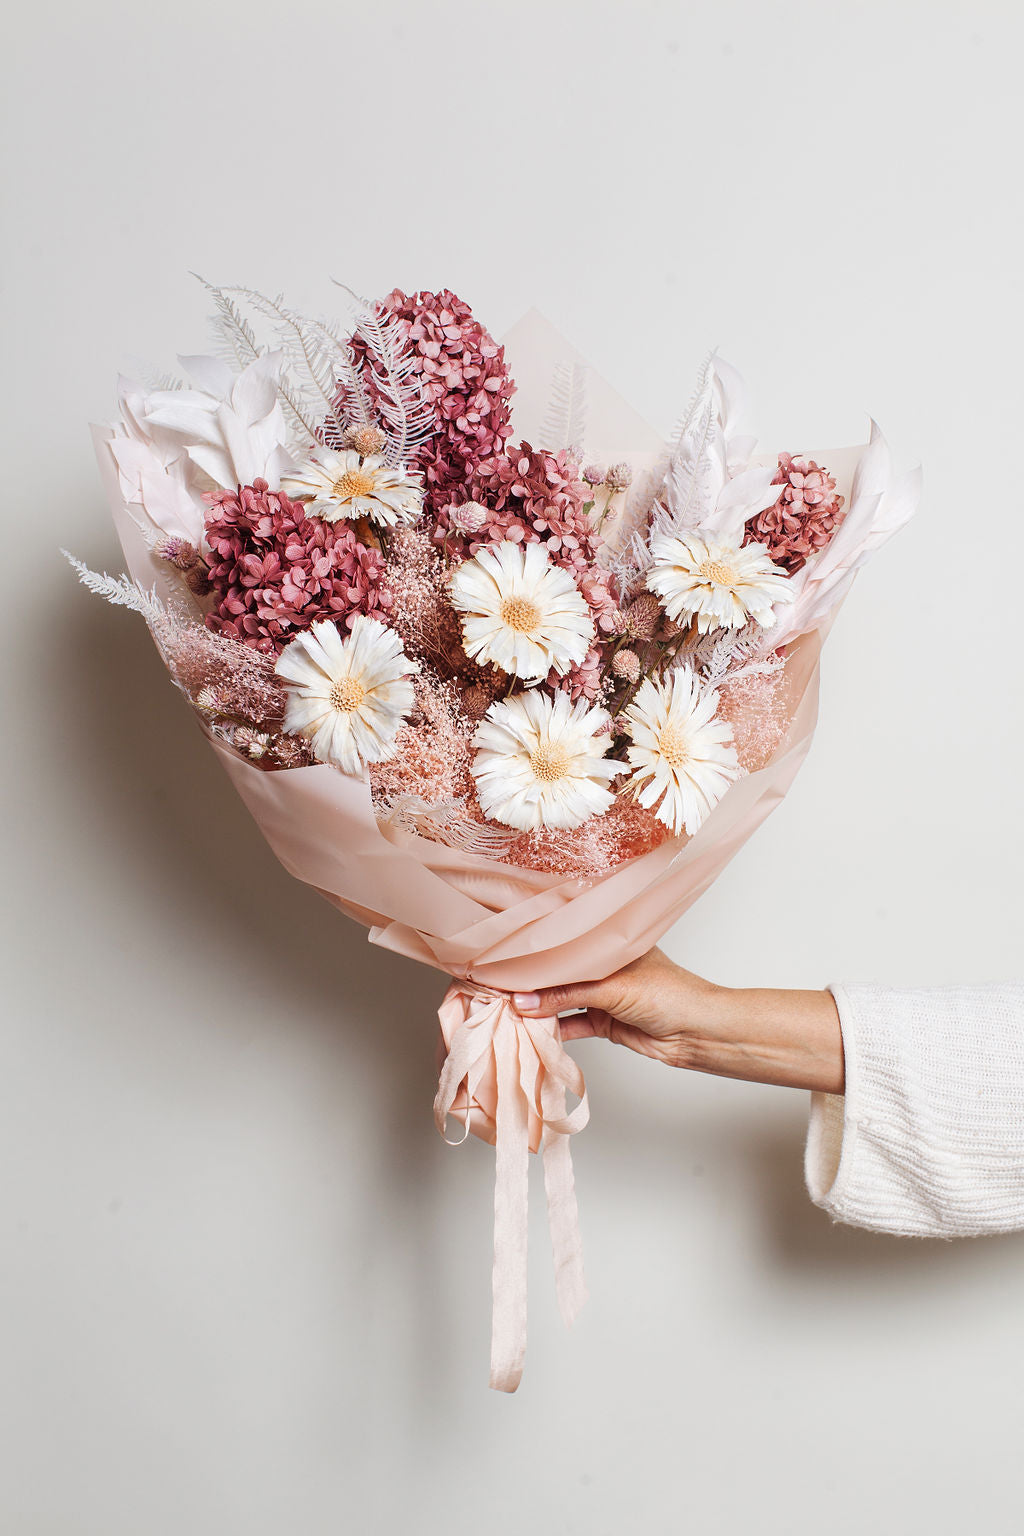 Buy Small Dried Flower Bouquet Return Gift Online